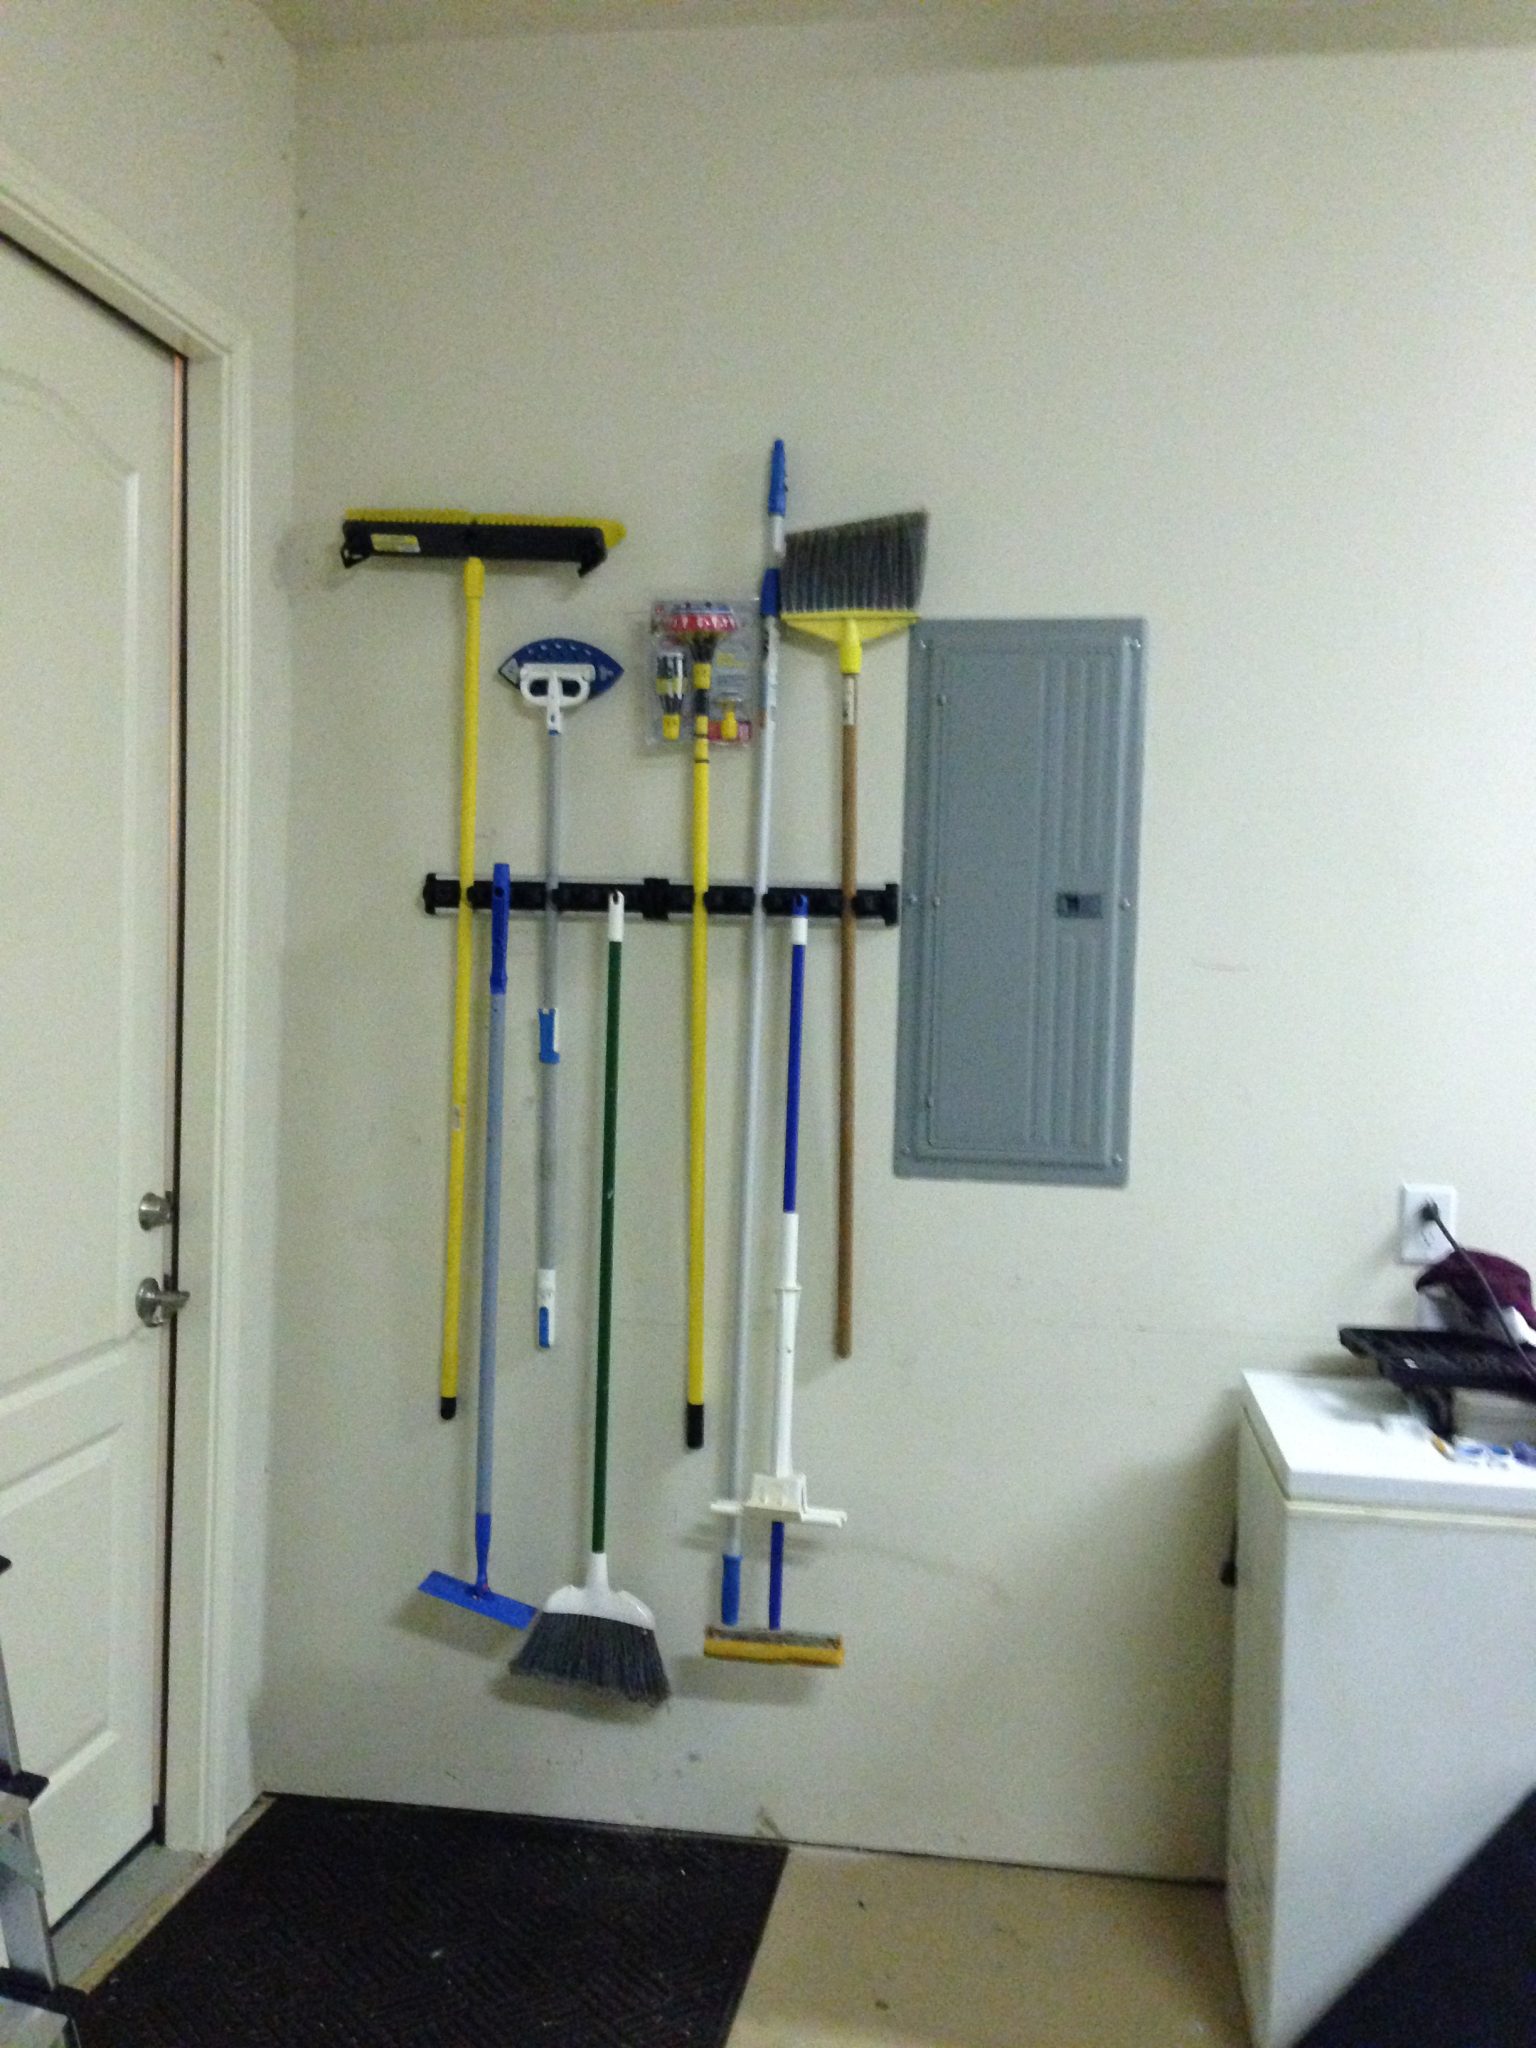 A Jones For Organizing | DIY - How to install a grook utility holder with the right ...1536 x 2048